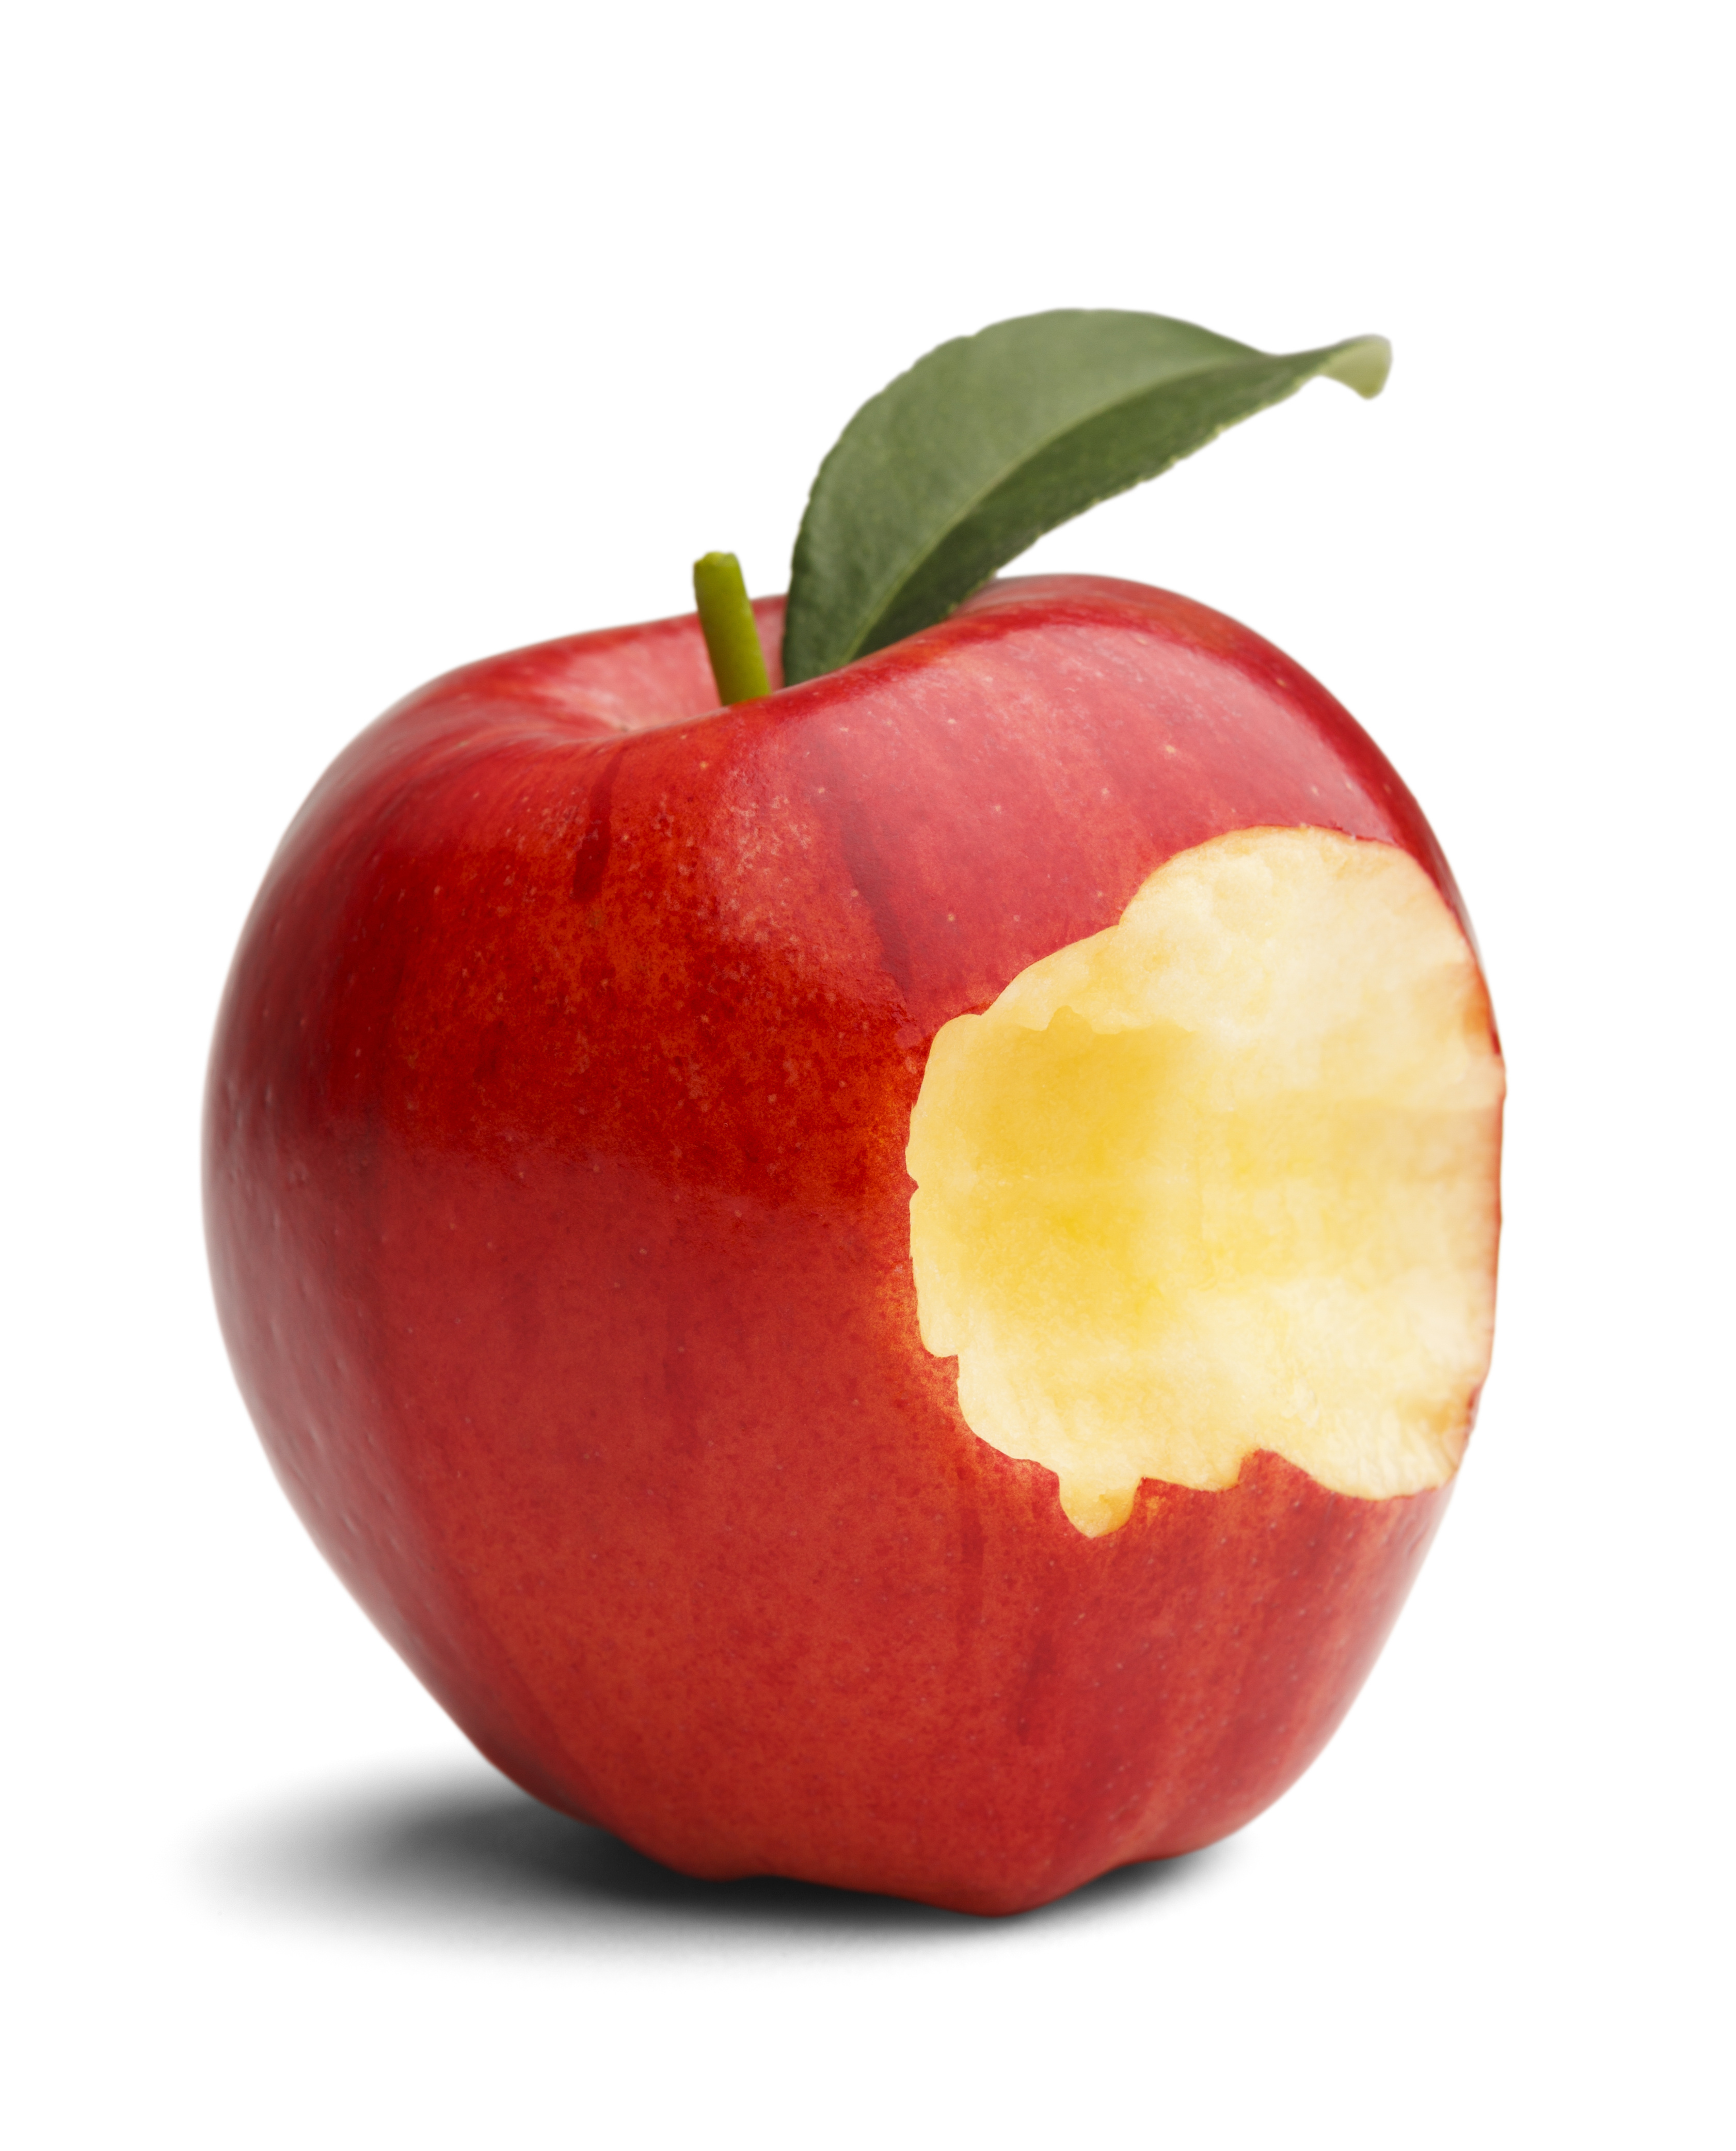 One Bite At The Apple: PTAB Closes IPR Joinder Loophole